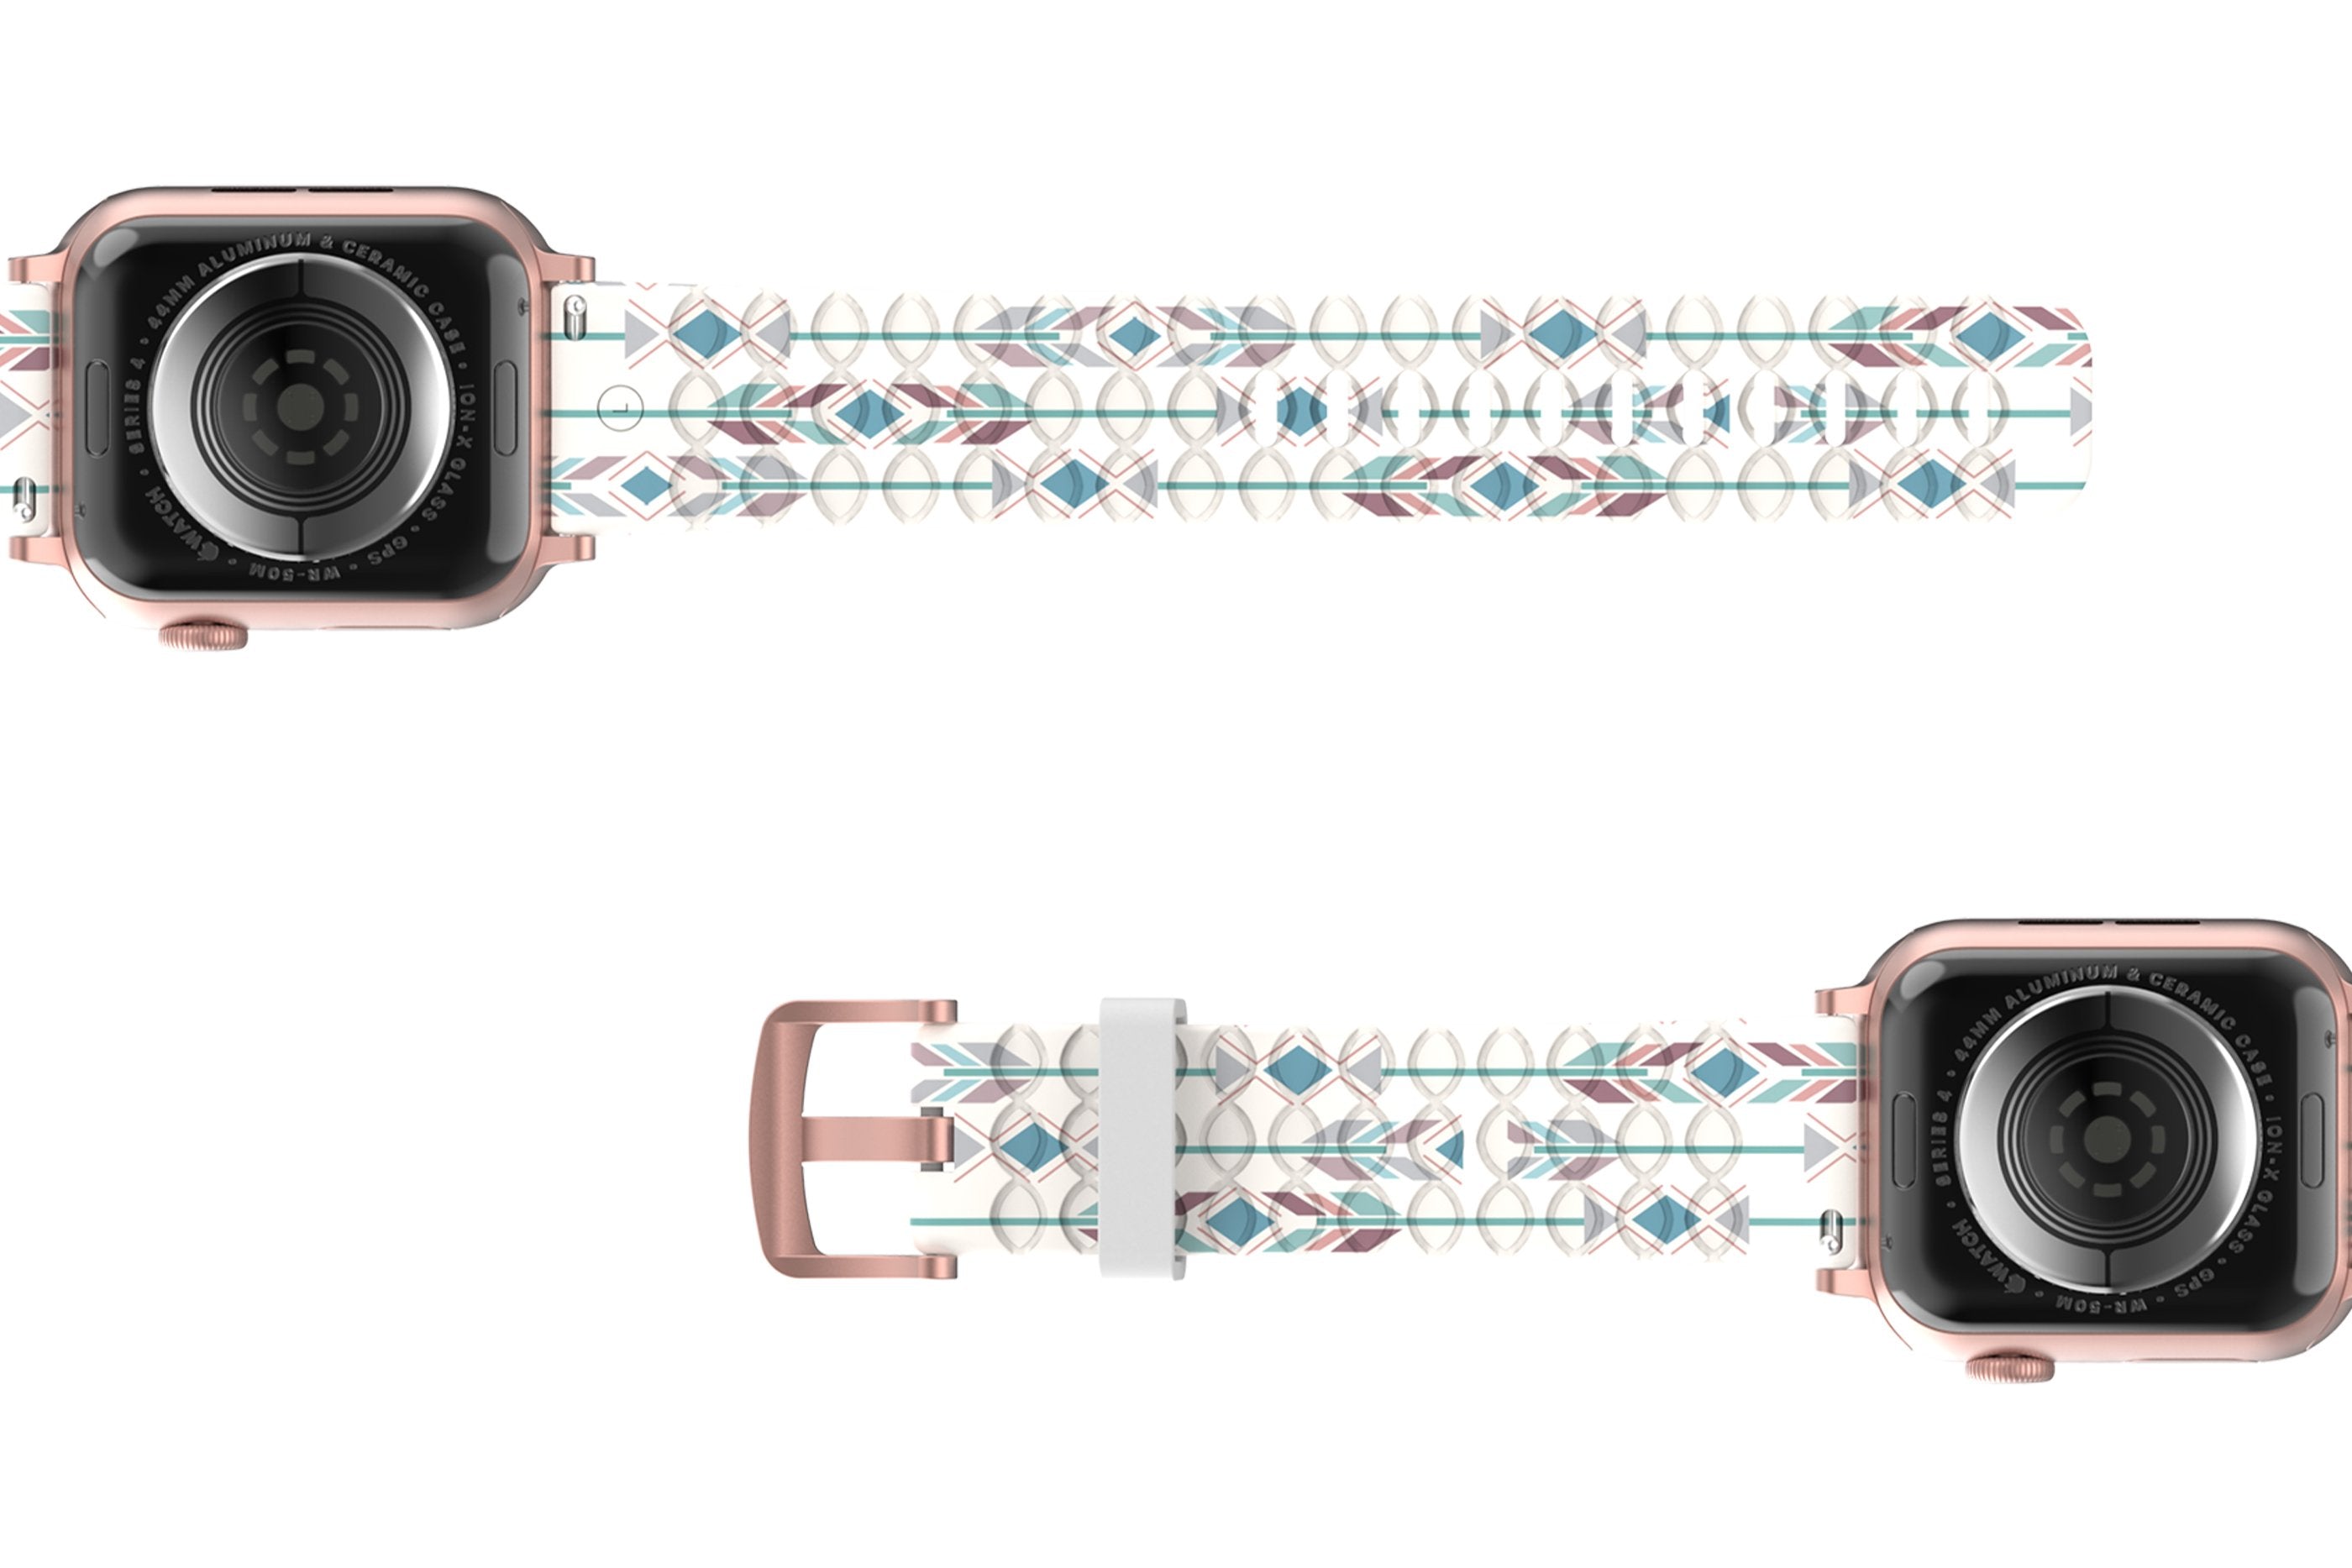 Wanderlust - Apple watch band with rose gold hardware viewed bottom up 